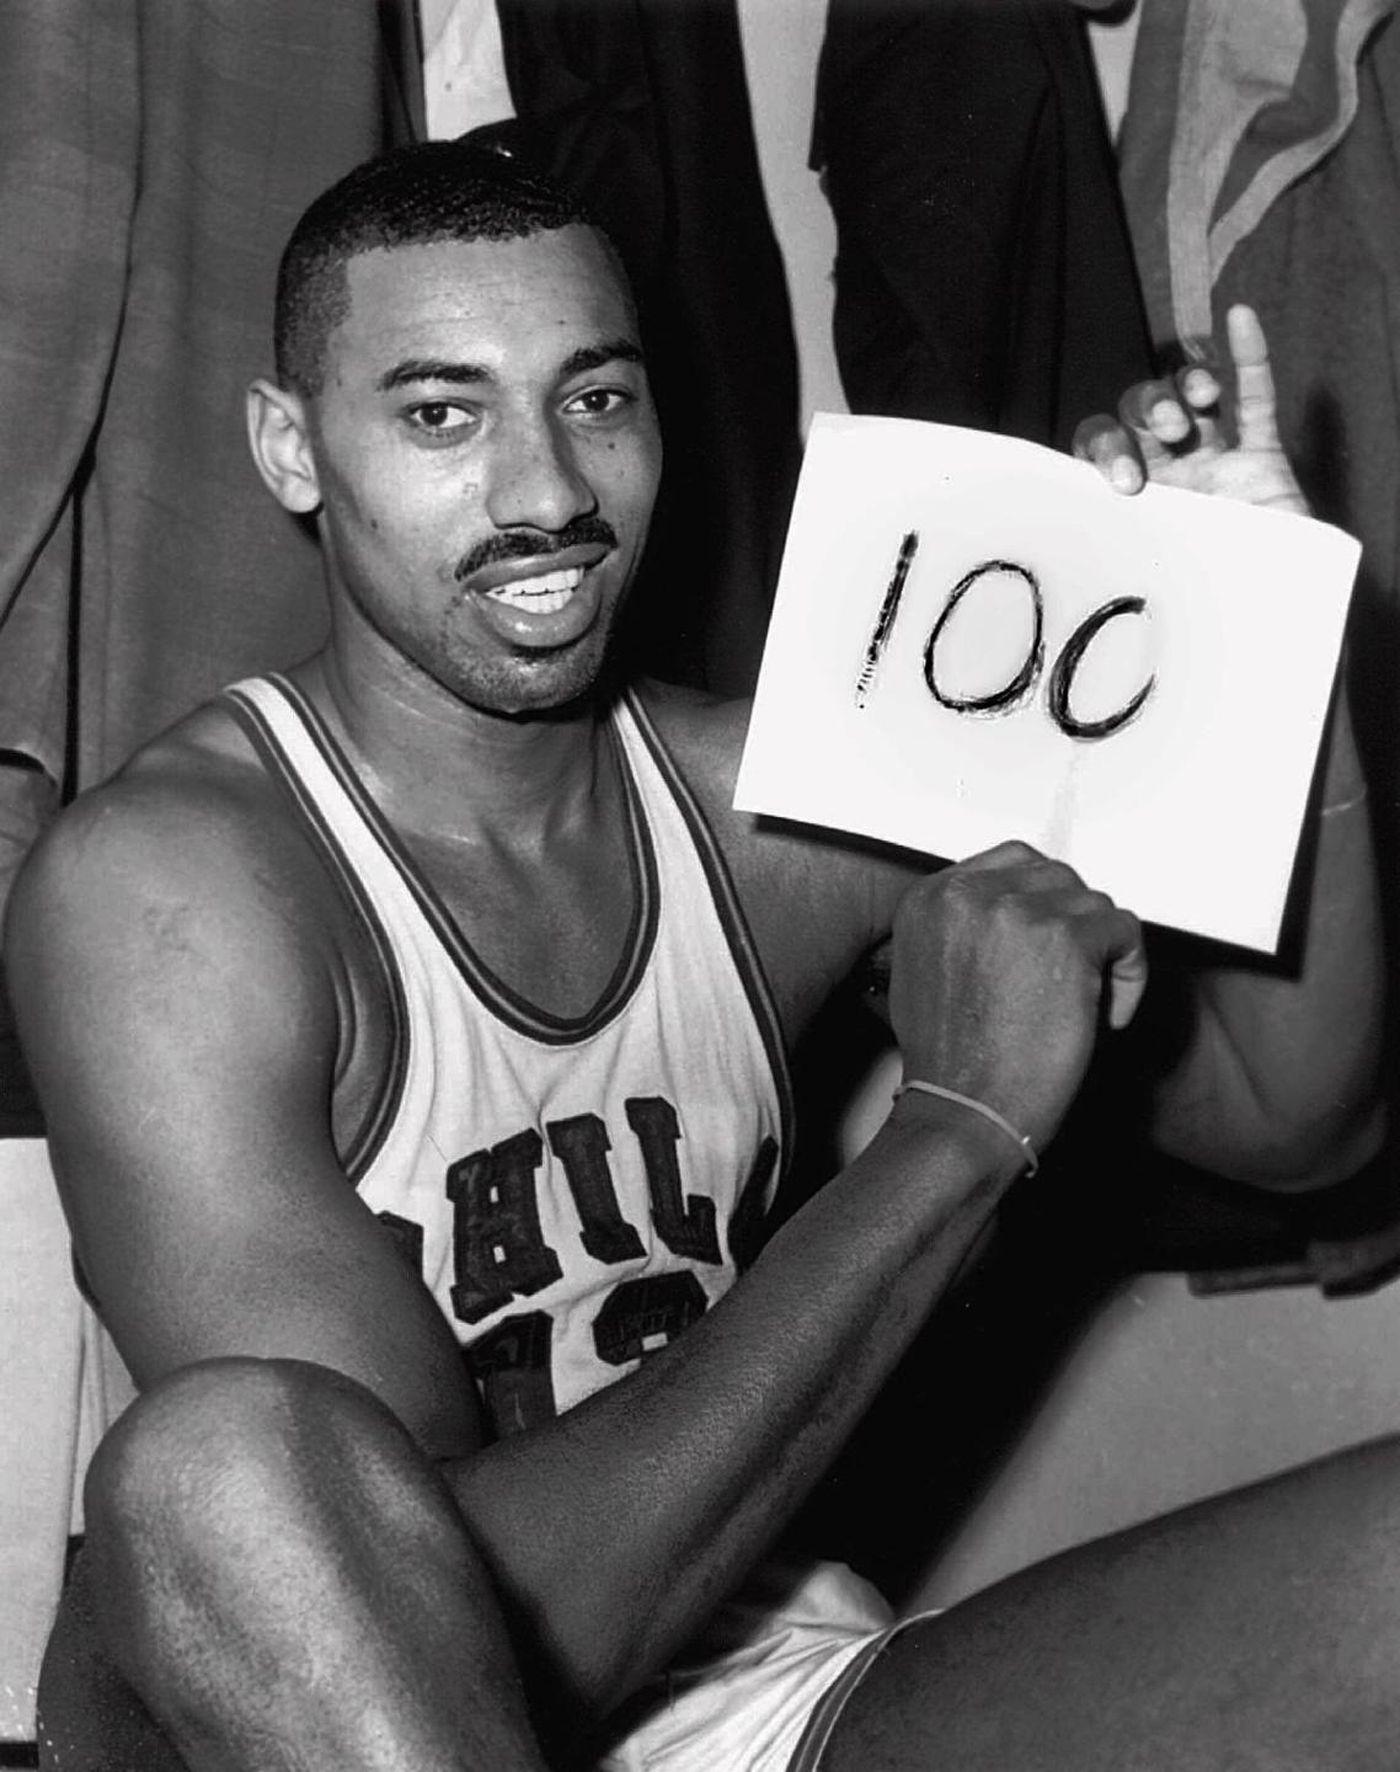 The day Wilt Chamberlain, NBA legend, died at 63 in 1999 Daily News